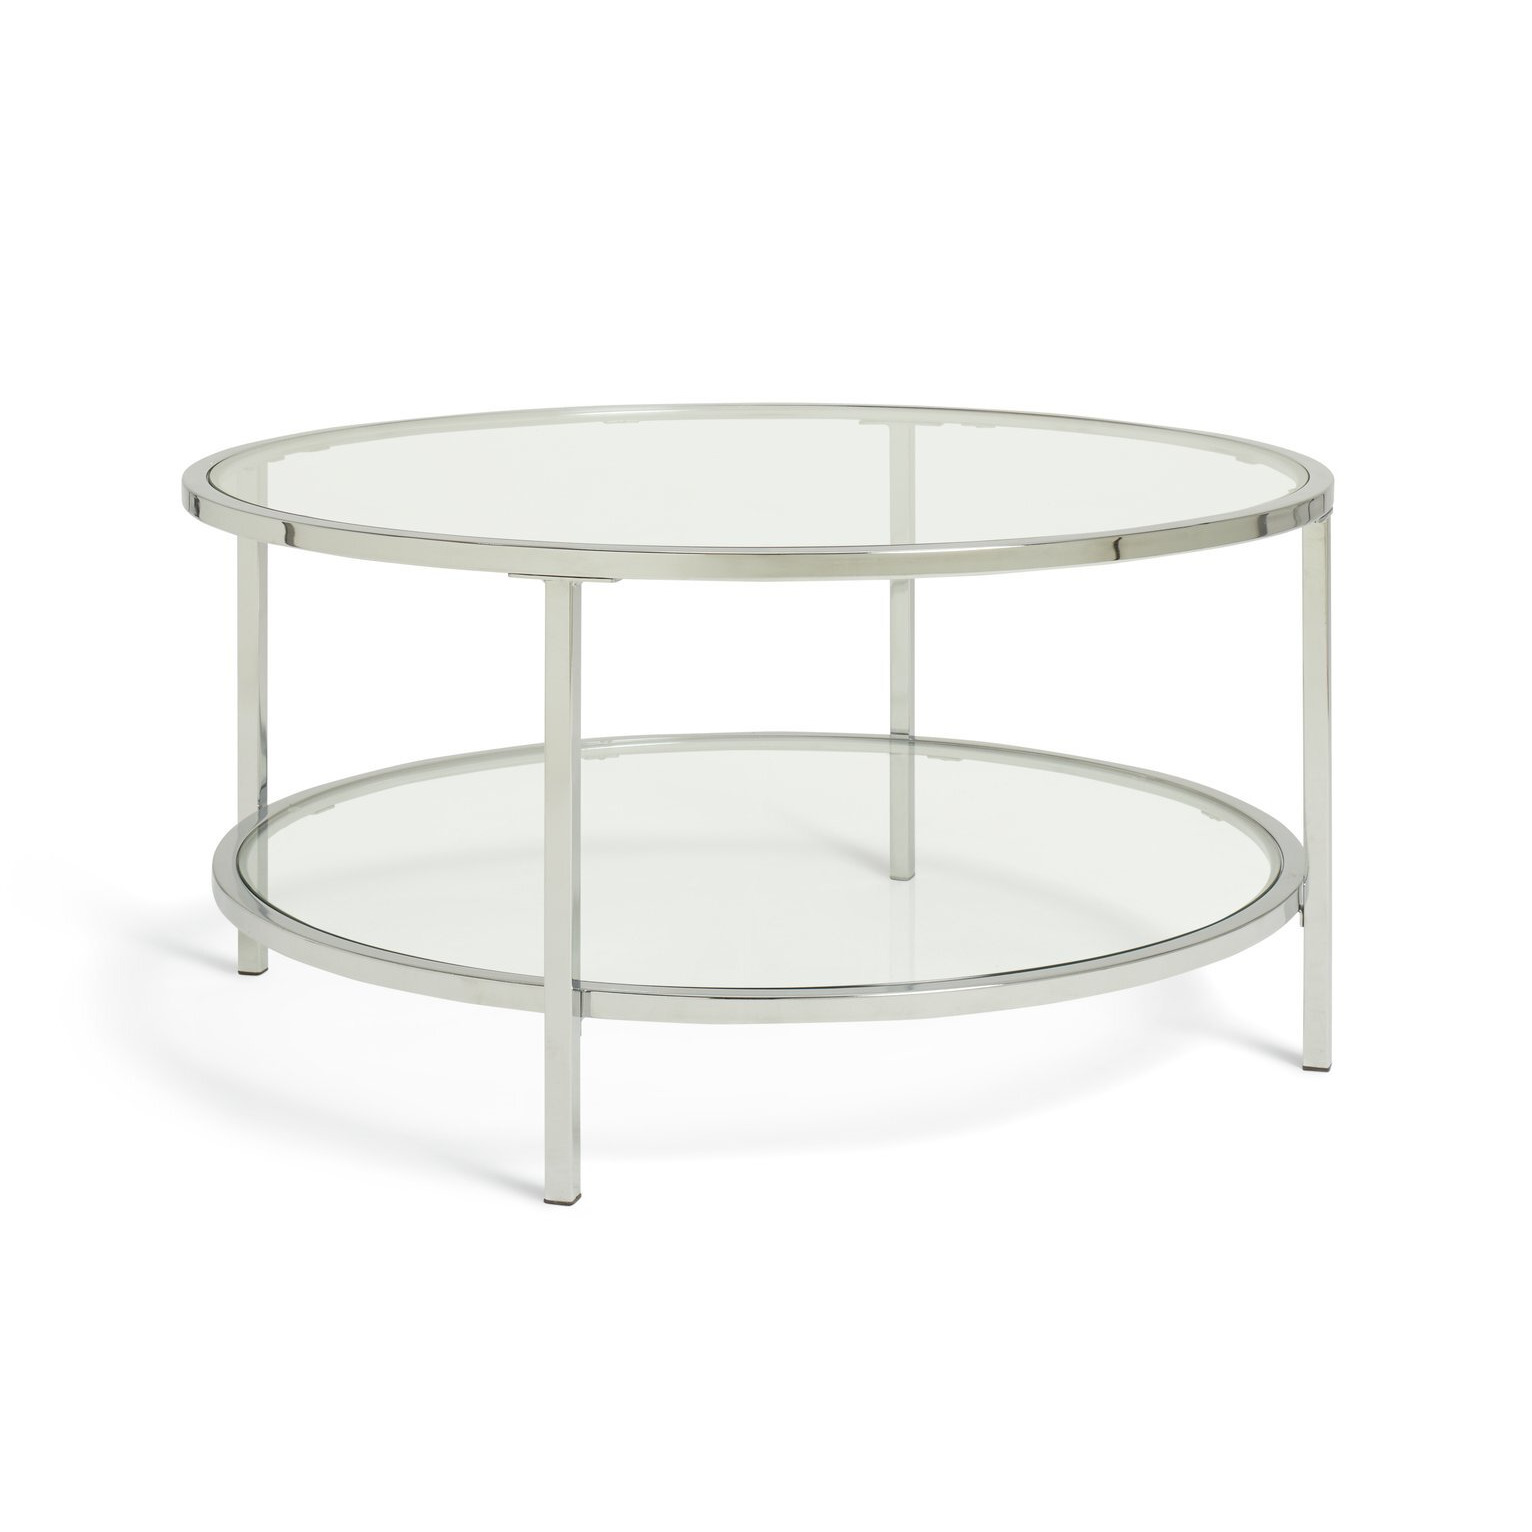 Habitat Boutique Round Coffee Table - Silver - image 1